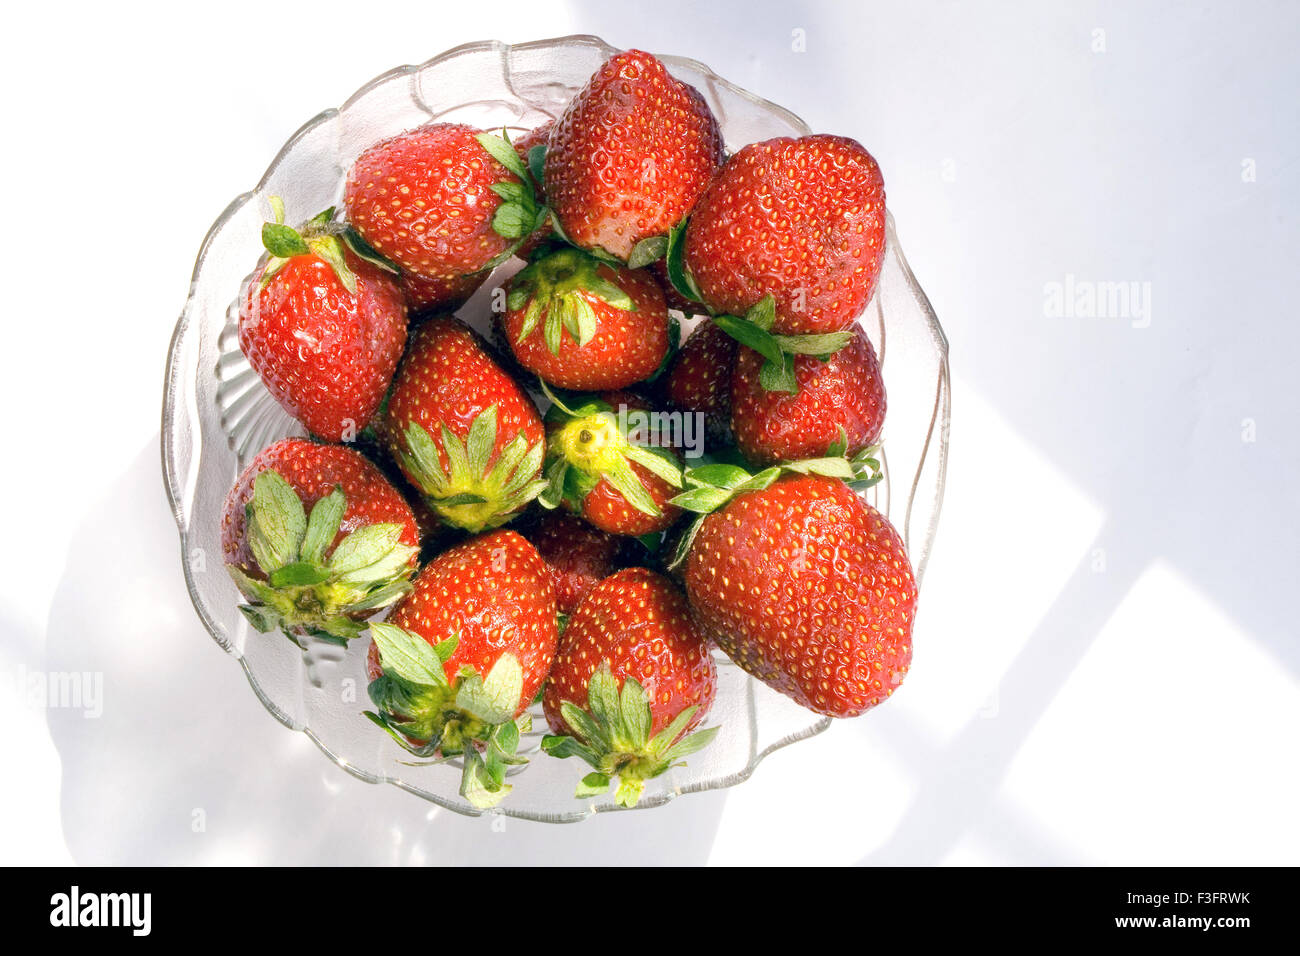 Strawberry in bowls on white background Stock Photo